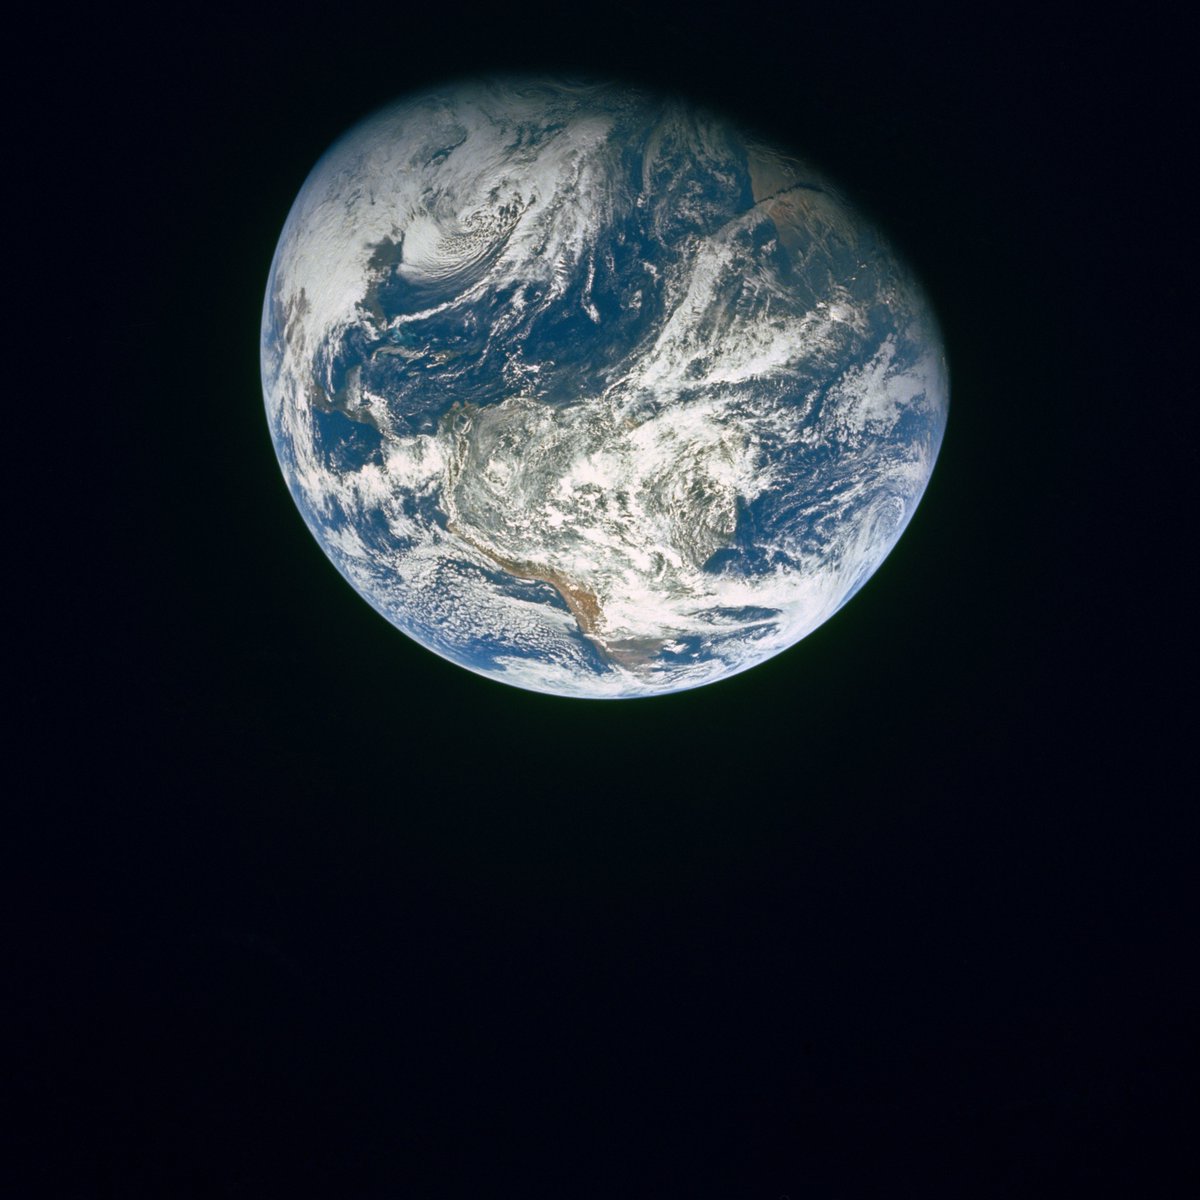 🌍📸 The first photograph ever taken by a human of the entire Earth was captured by the Apollo 8 crew on December 22, 1968, using a 77 mm camera. They were the first humans to witness Earth as a sphere suspended in space.  📷✨ #Apollo8 #EnvironmentalAwareness